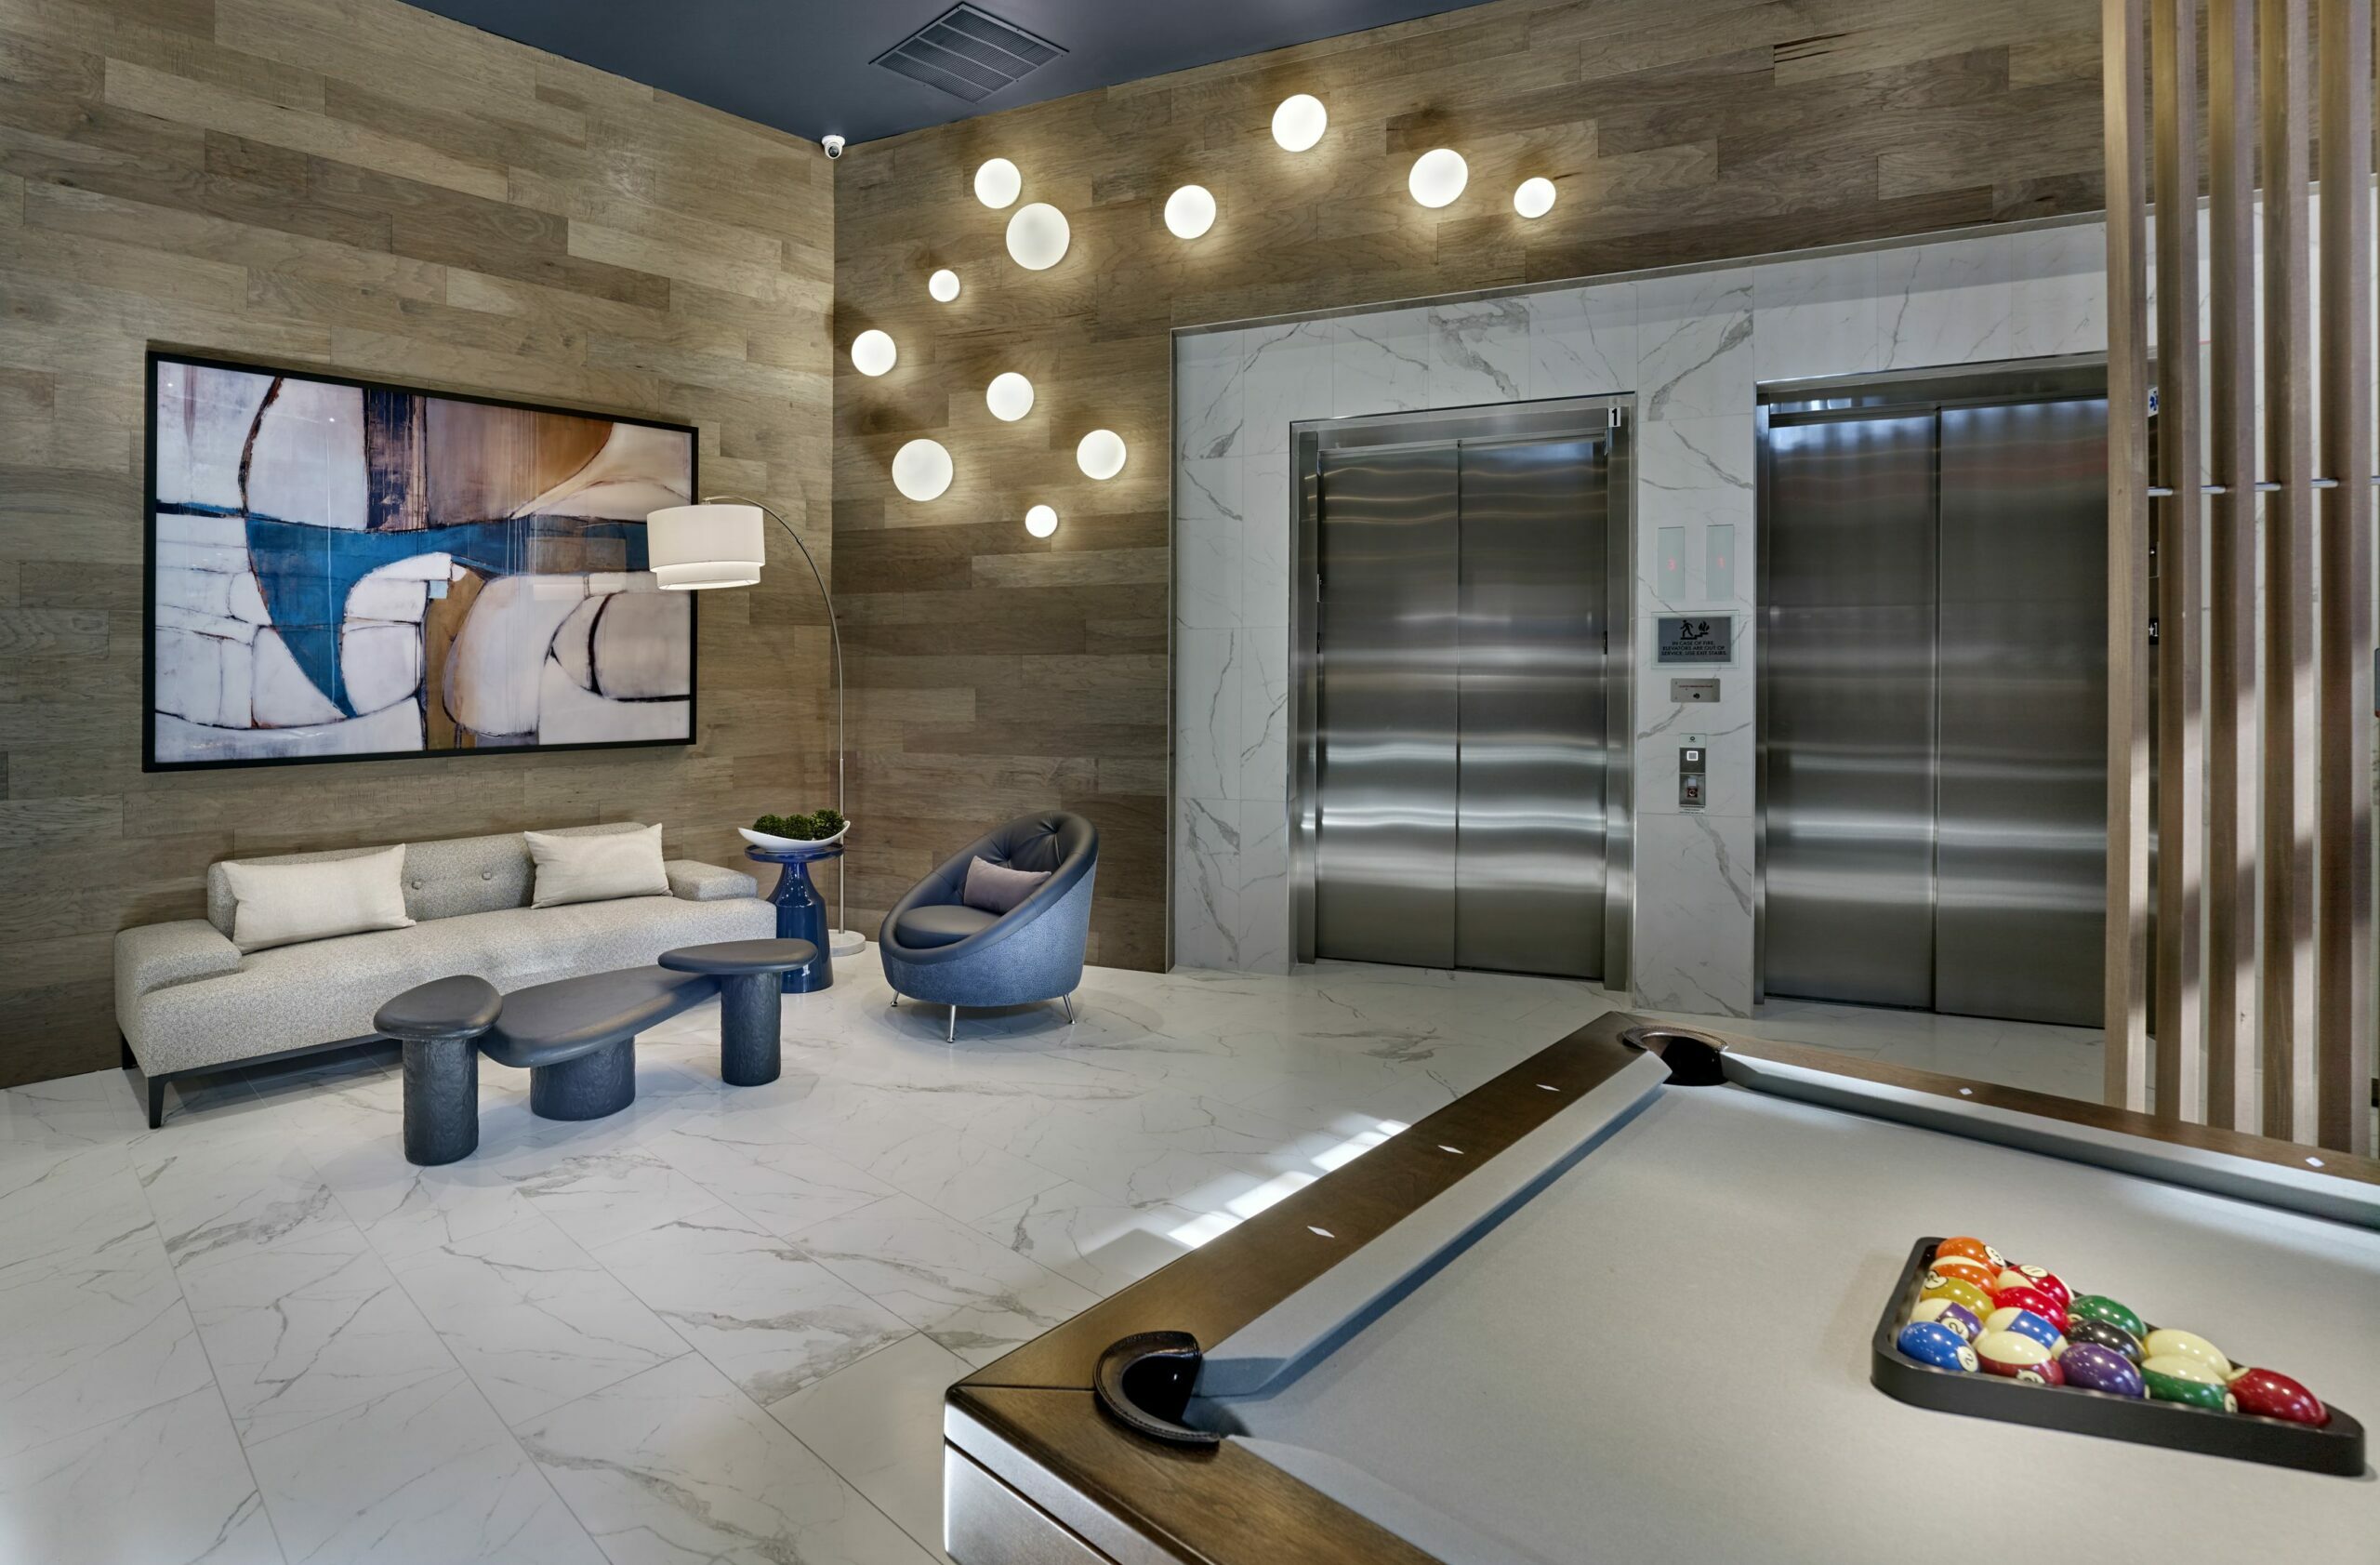 Lounge and game room in luxury multifamily amenity space in New Jersey.